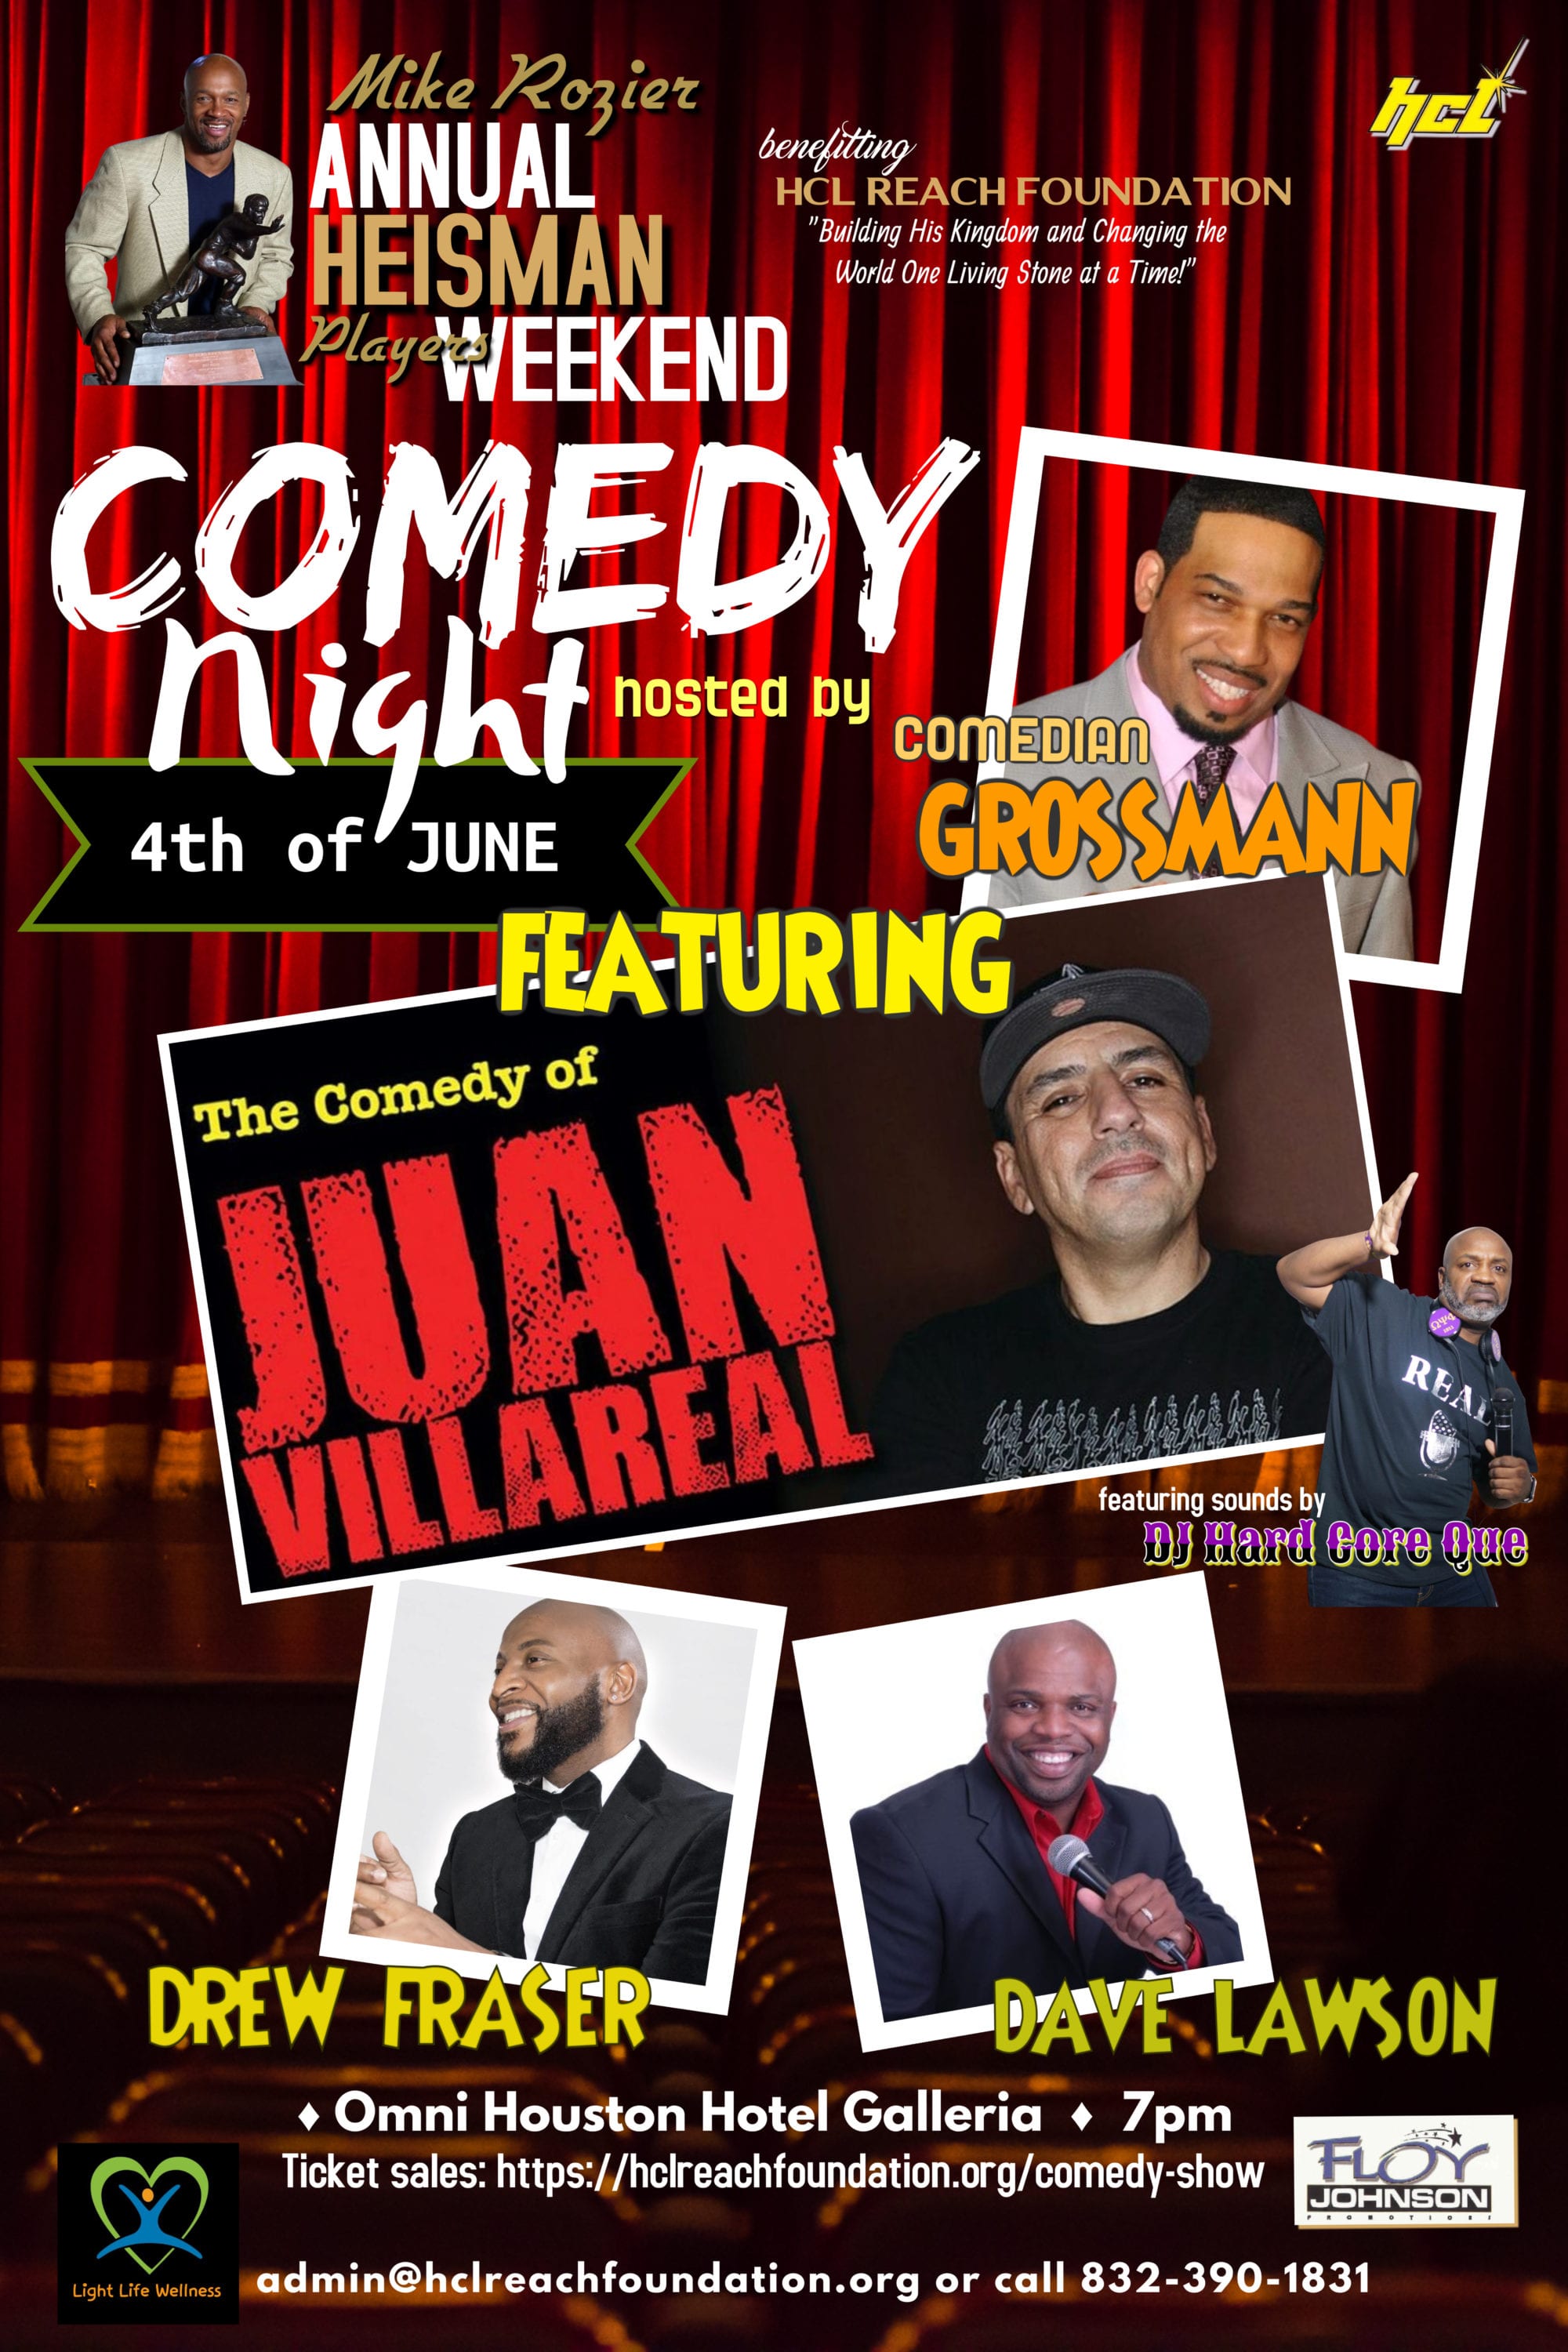 2021 Mike Rozier Heisman Players Weekend Comedy Night Flyer - d